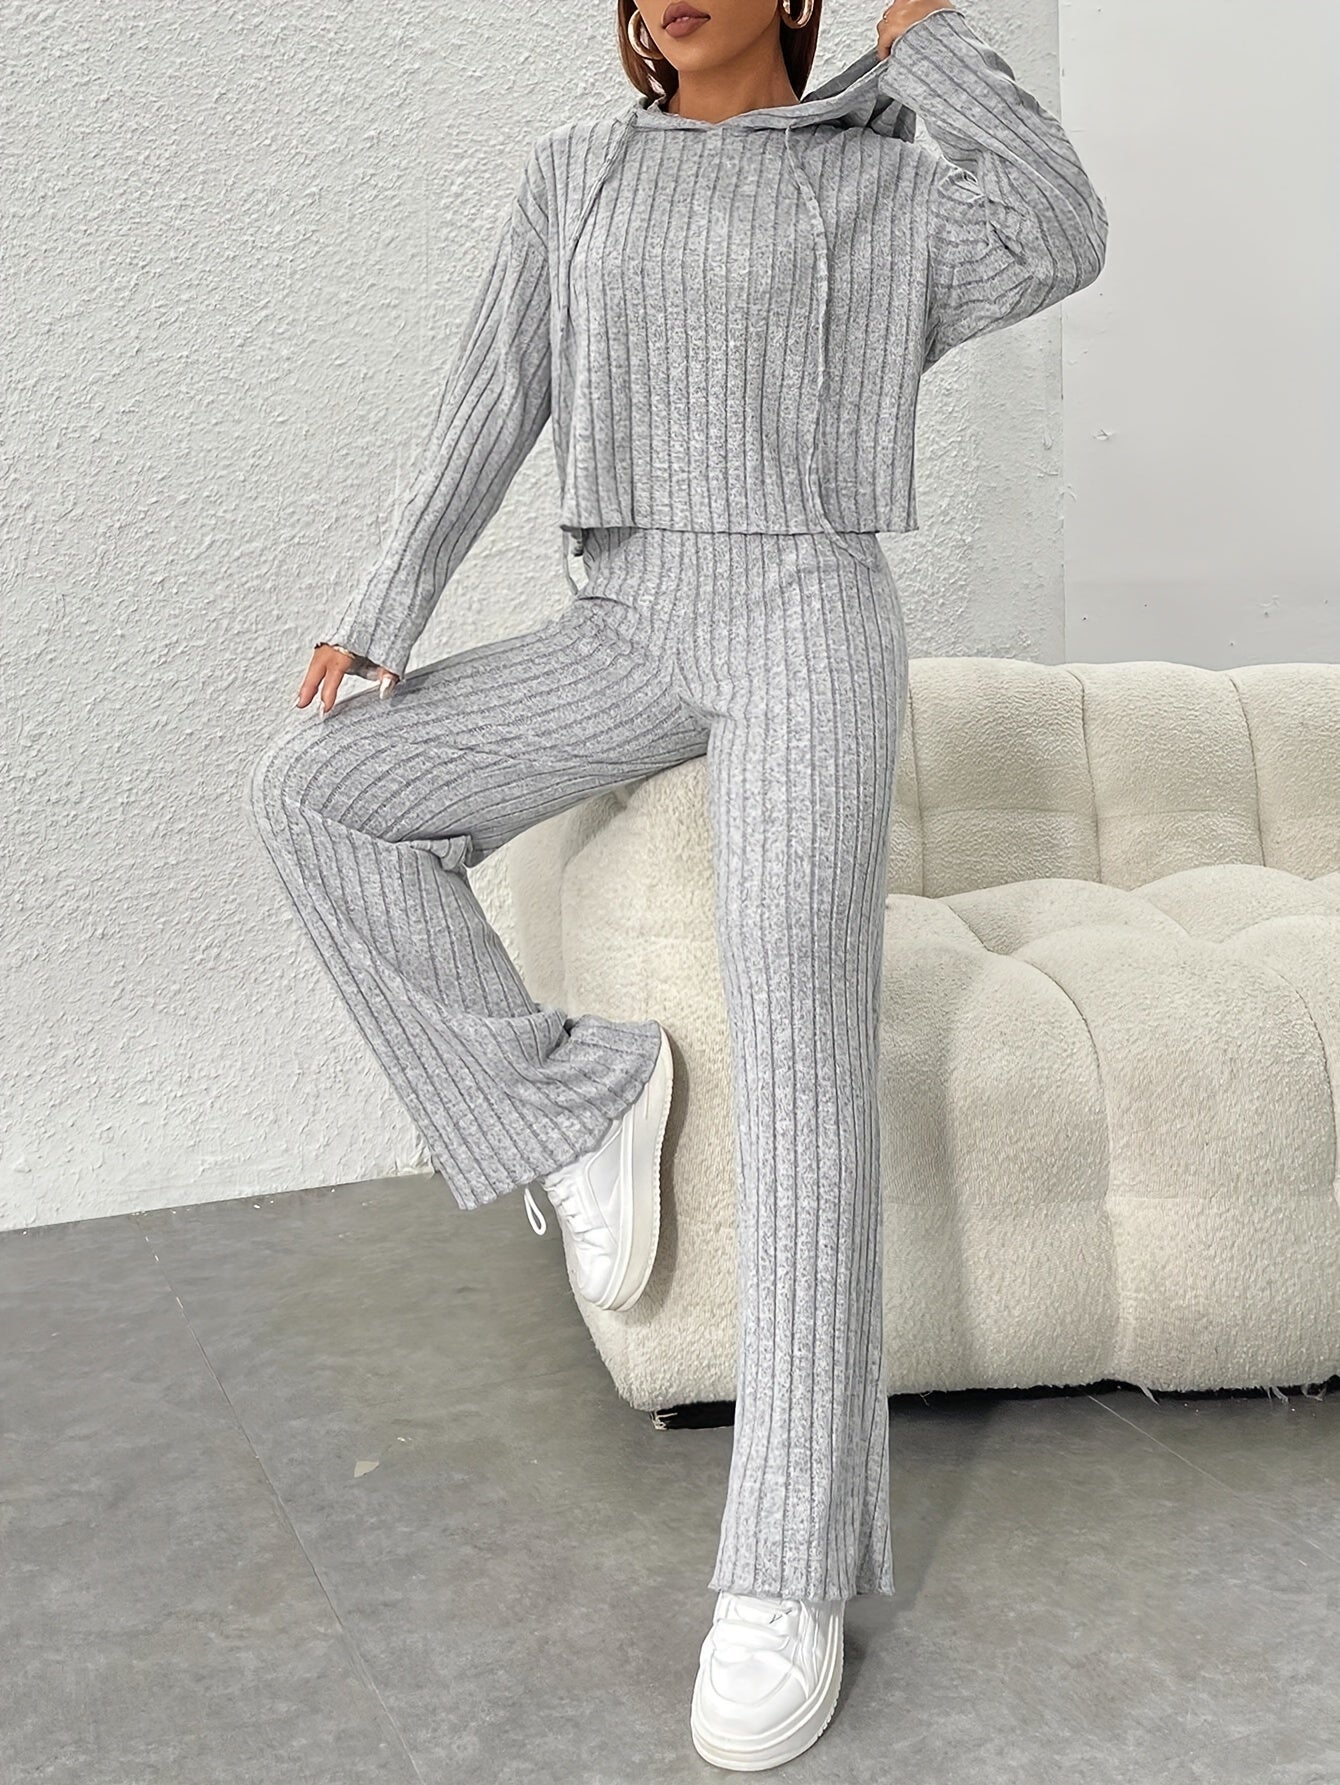 JENNIE Casual Ribbed Two-piece Set, Drawstring Long Sleeve Hoodie & Wide Leg Pants Outfits